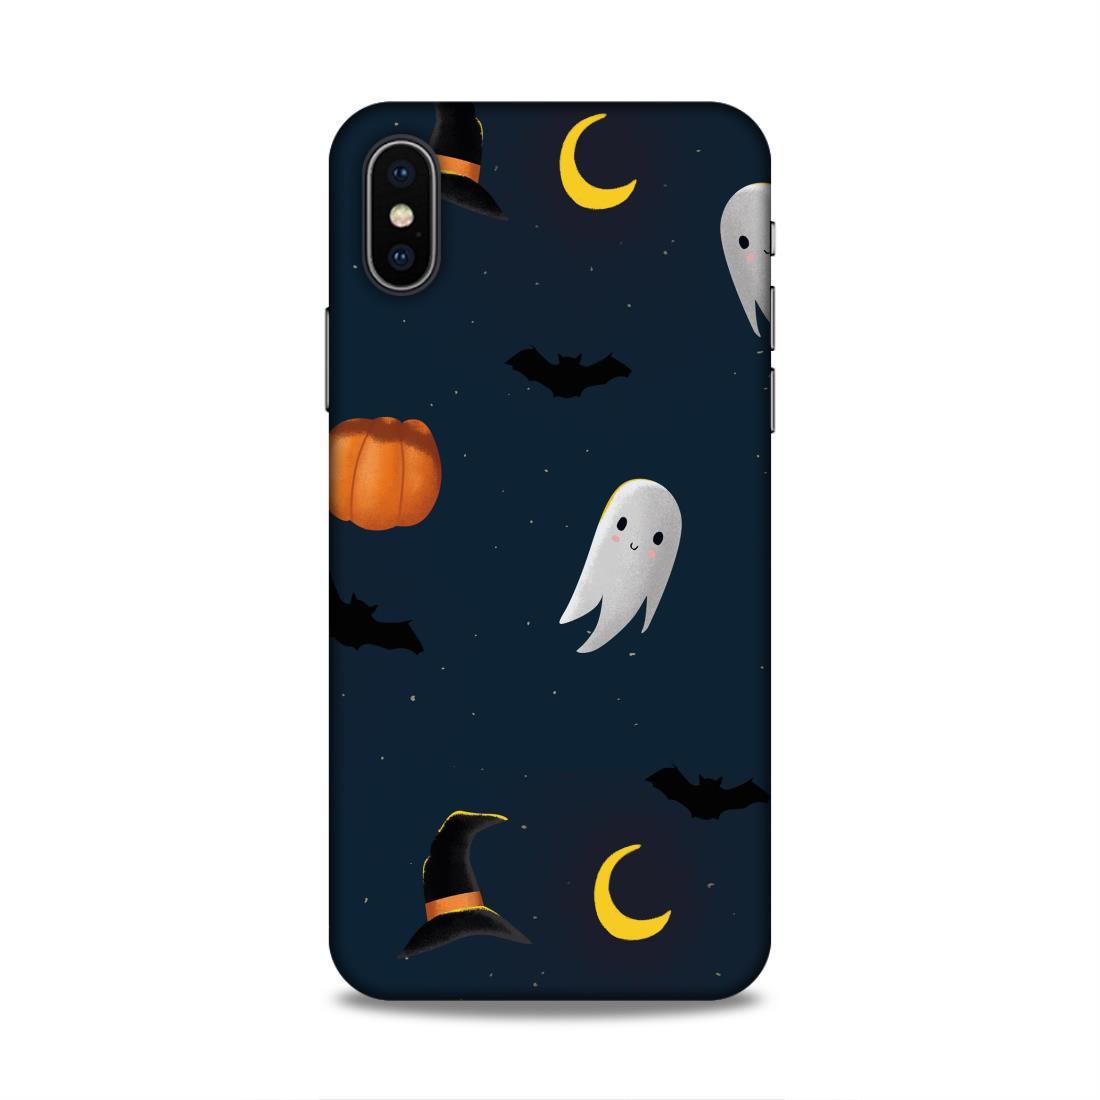 Cute Ghost iPhone X Mobile Case Cover